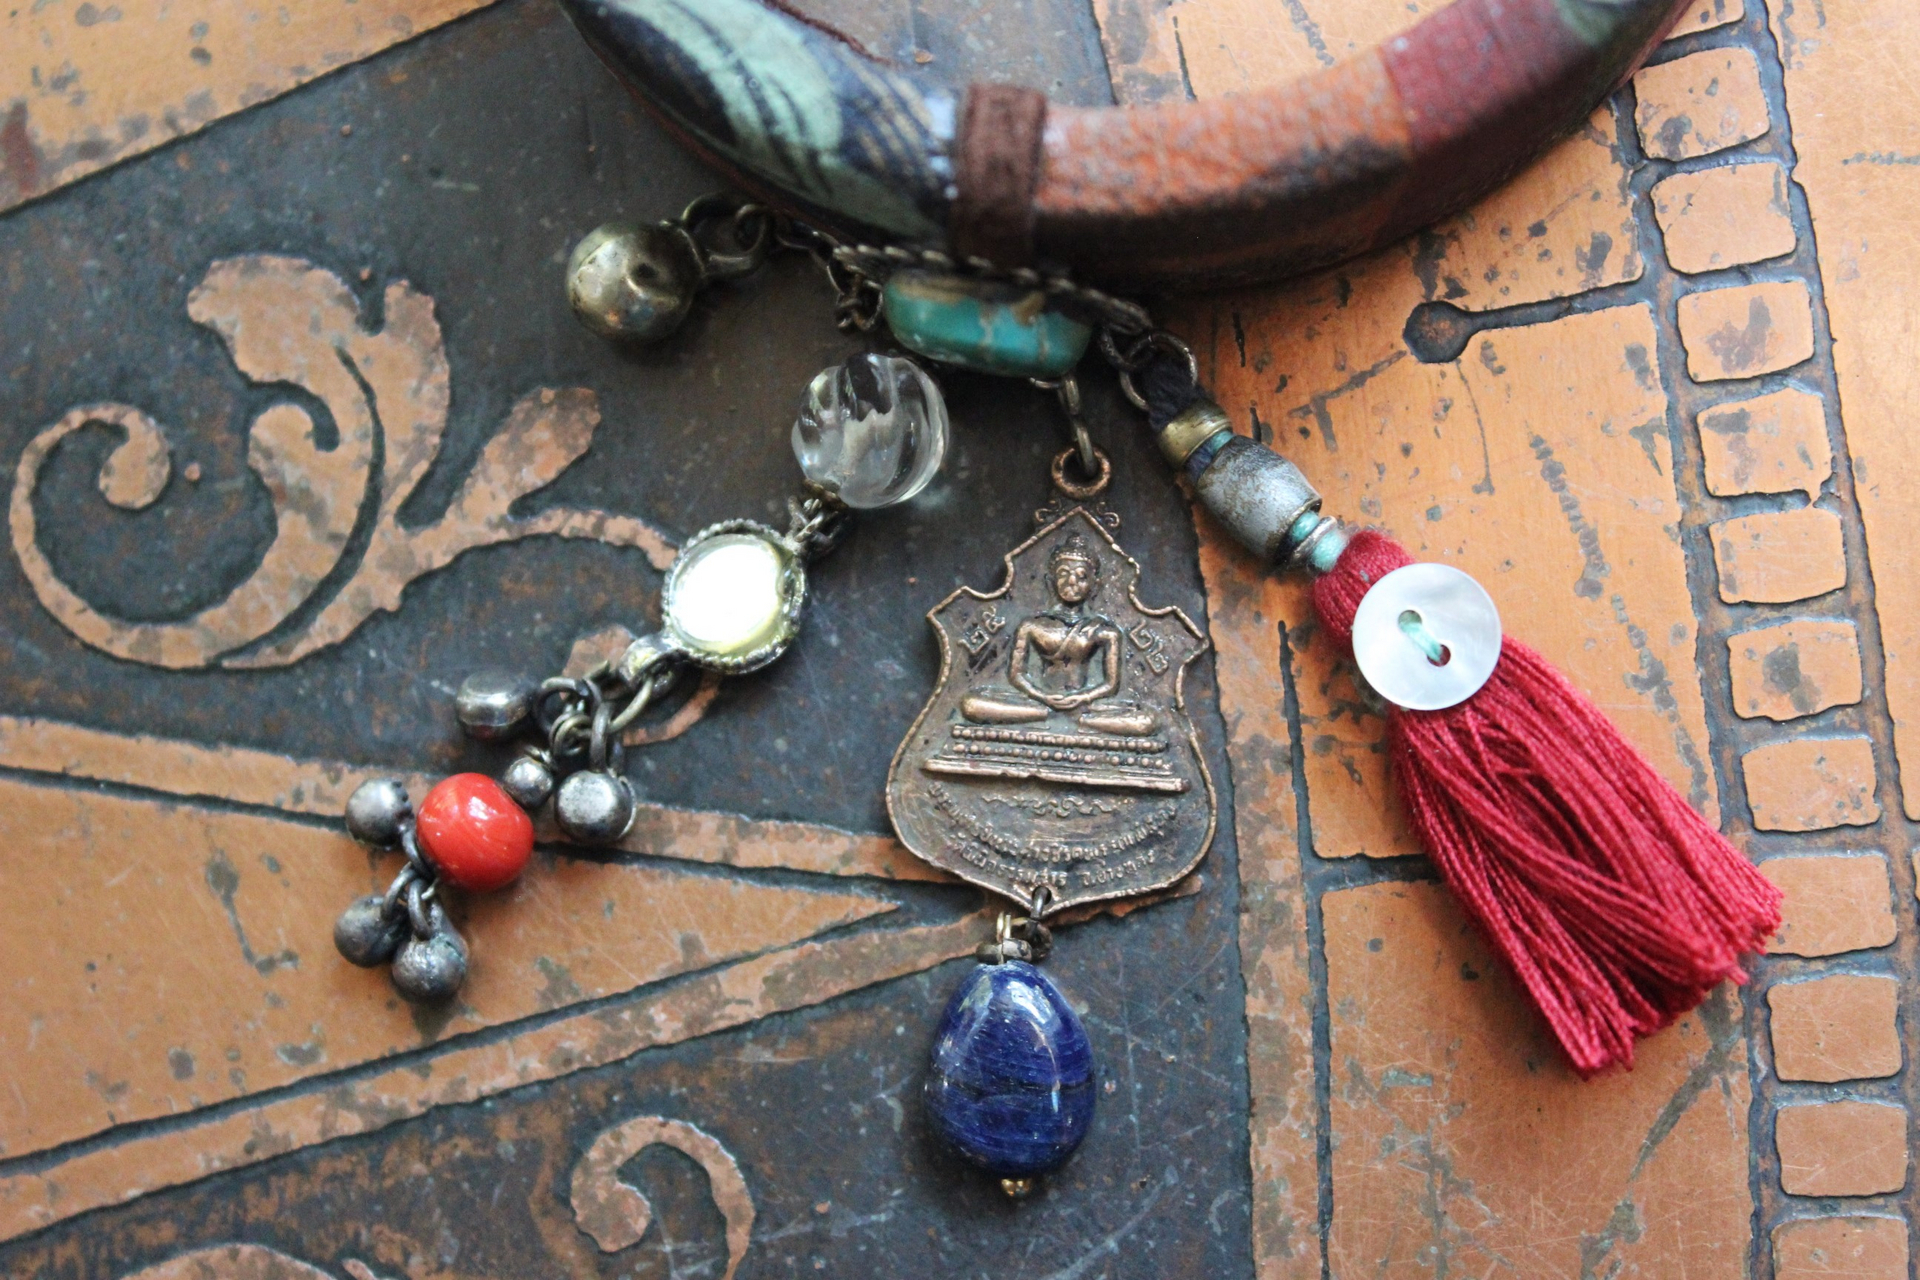 NEW! Invite Them In Necklace & Bracelet Set with Antique Hand Painted Thangka,Ghost Quartz Point Pendant,Carved Tourmaline Buddha,Foxtail Chain Tassel,Antique Buddha Medal & Much More!